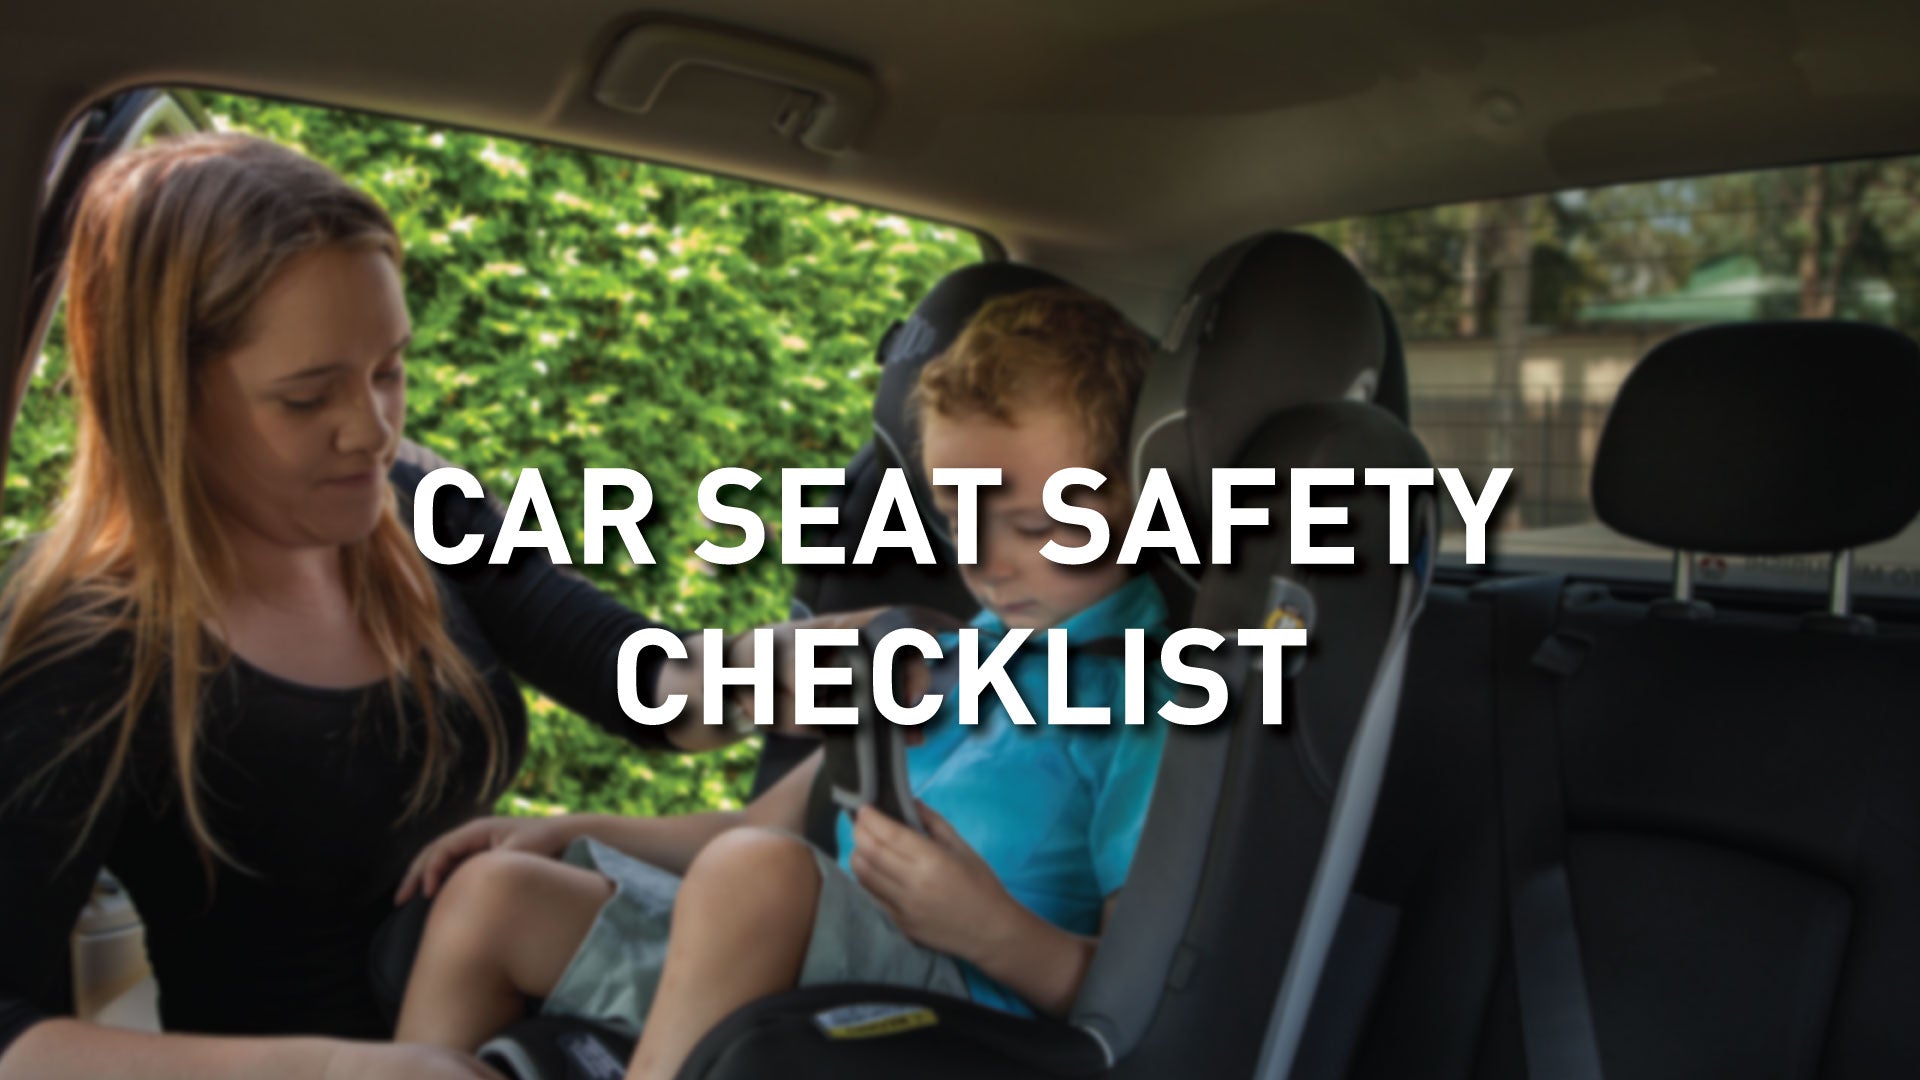 Long Trips? Check this Safety Checklist!